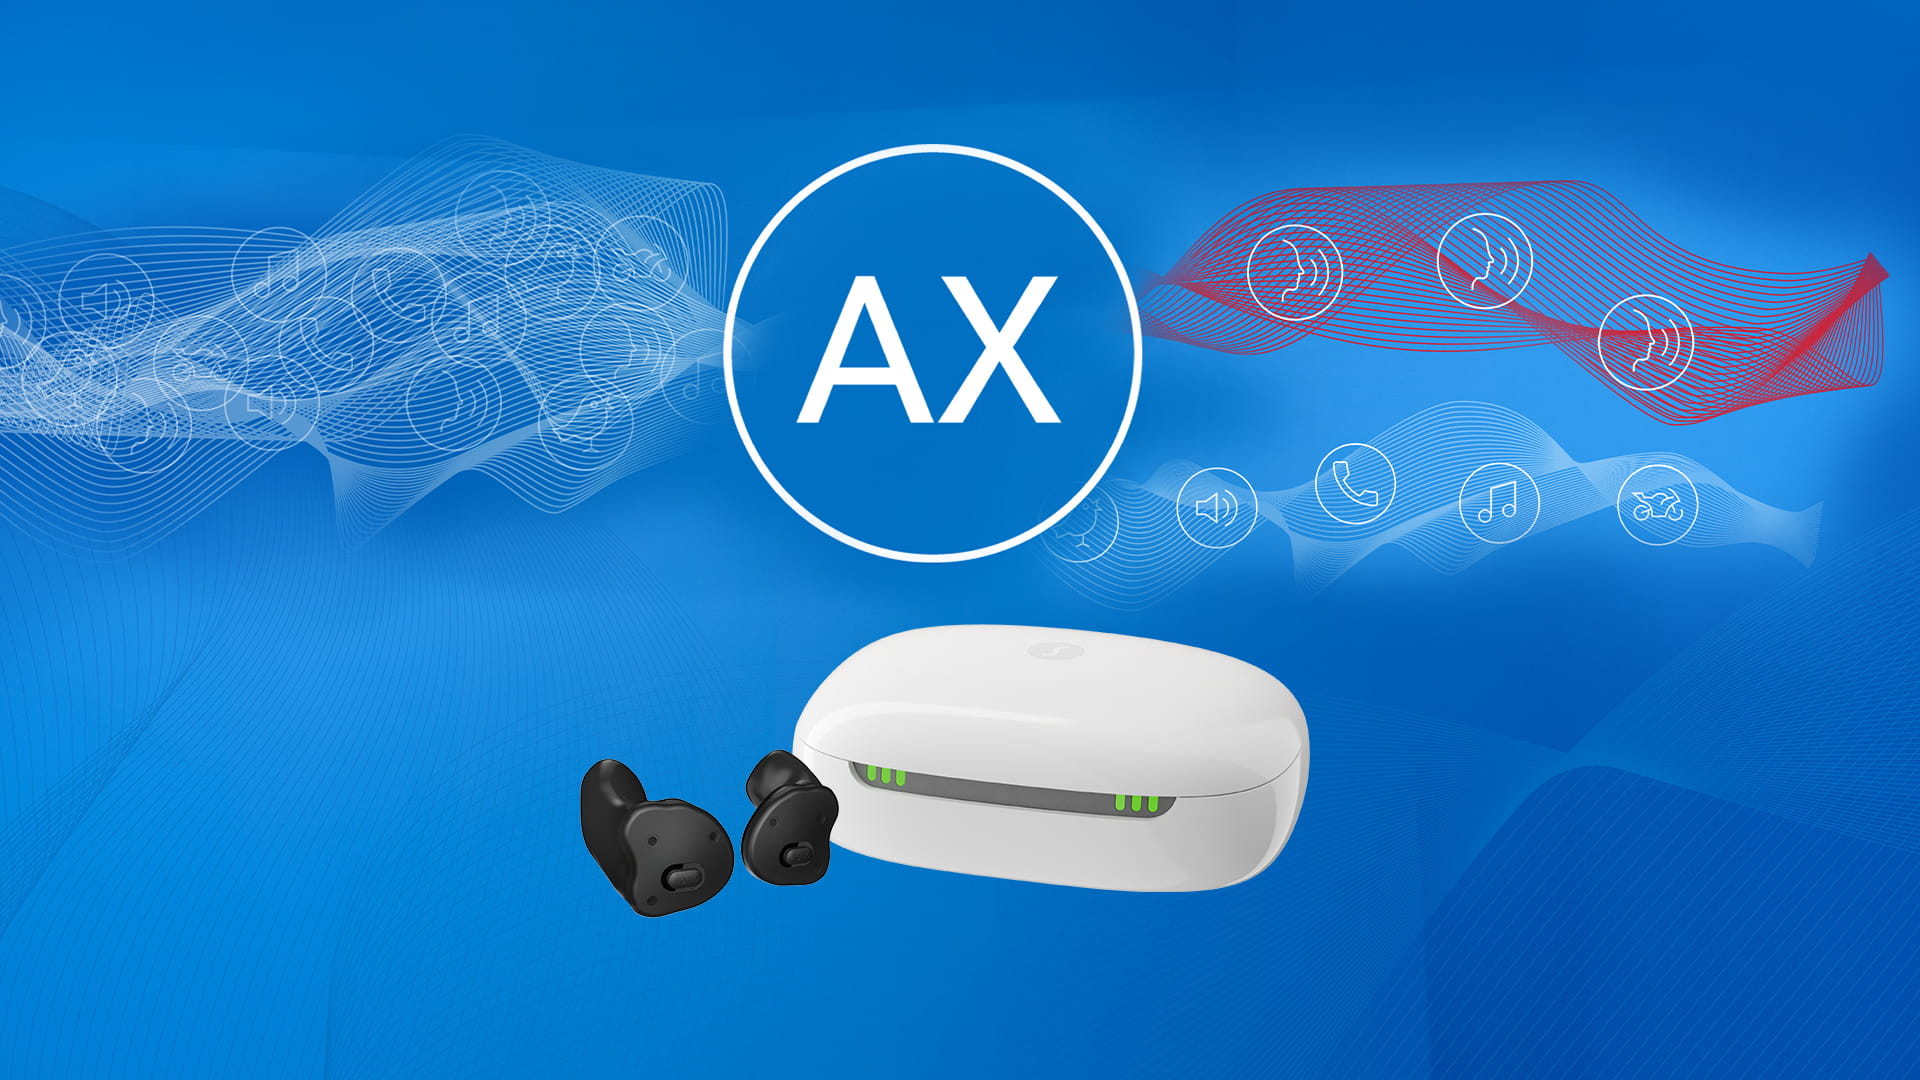 signia ax logo with insio charge&go ax hearing aids